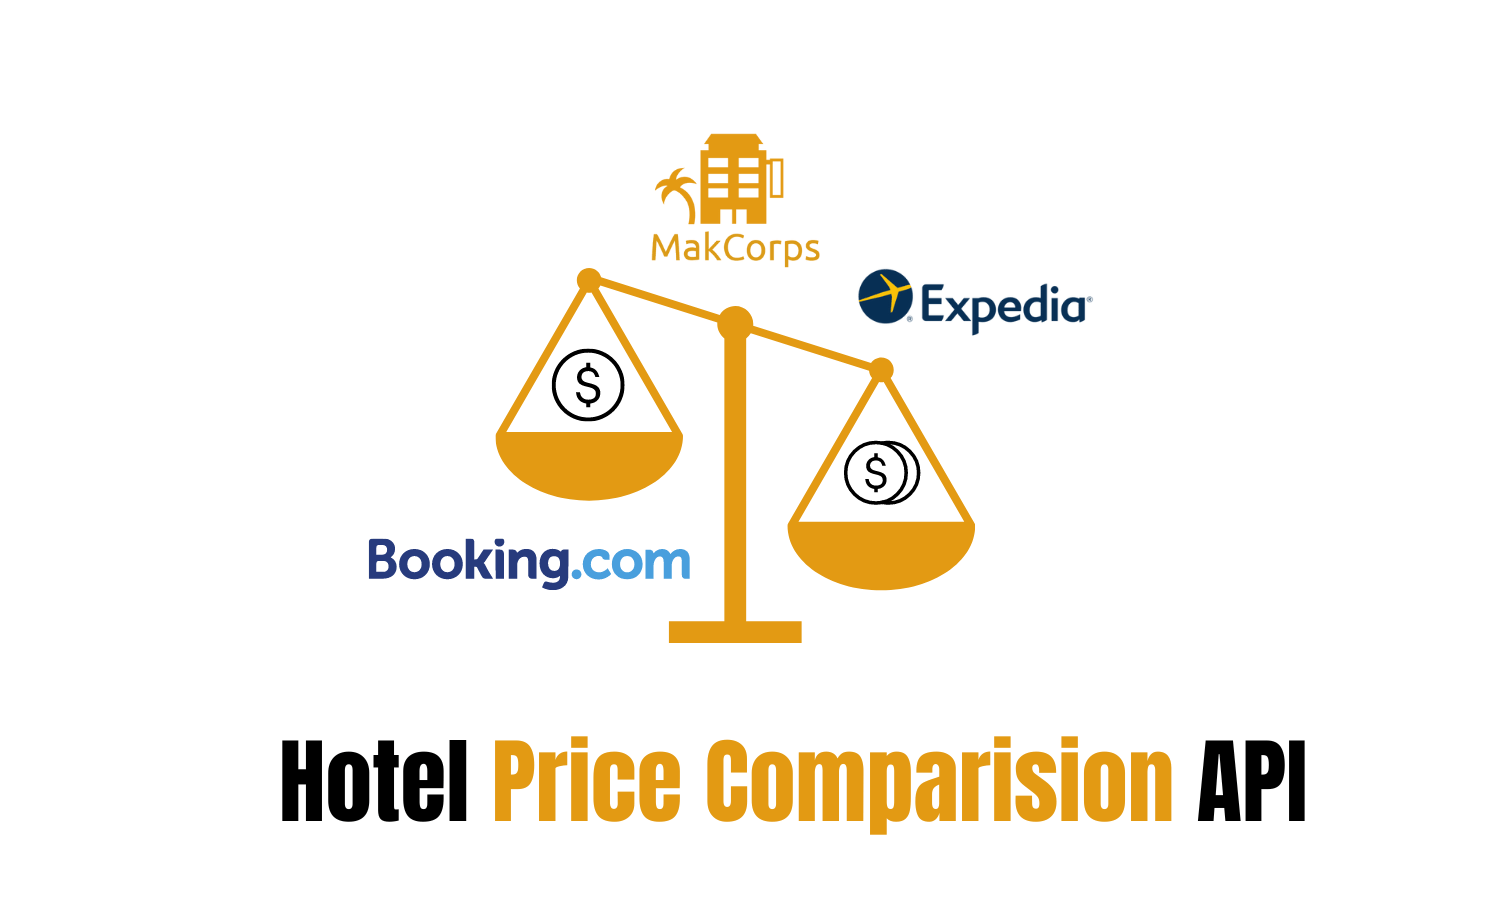 why do you need hotel price comparison API